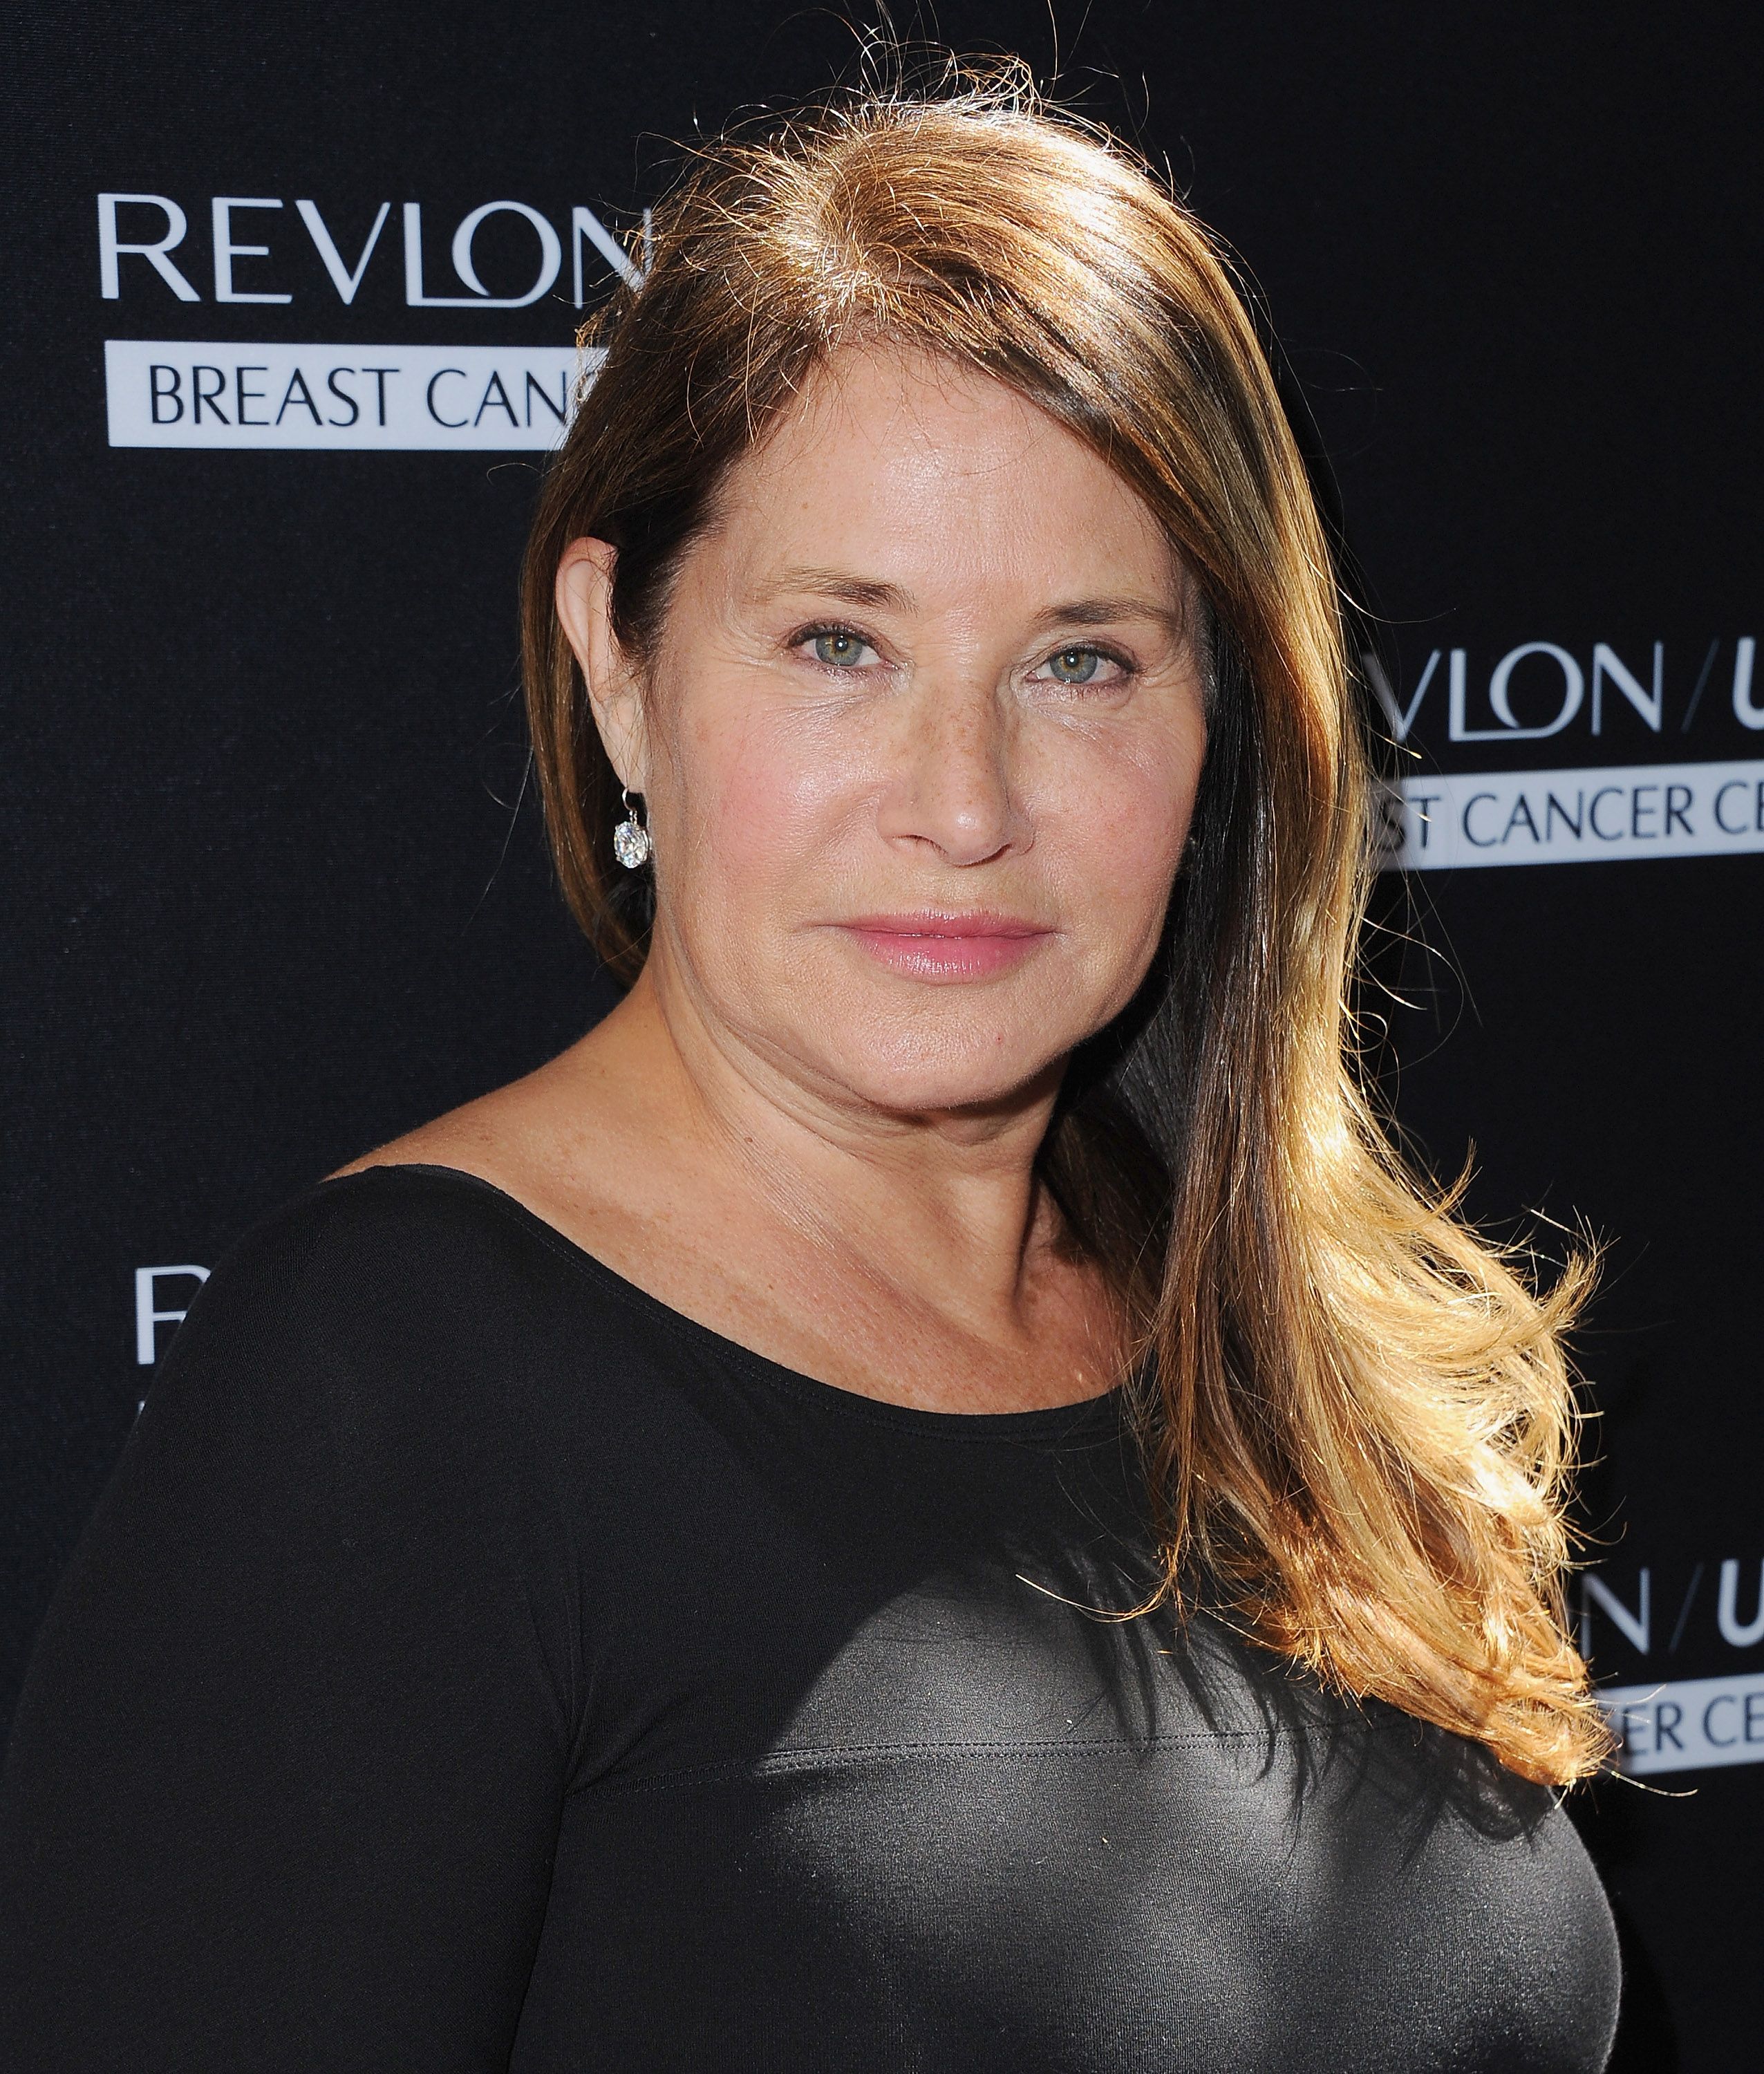 Lorraine Bracco at Revlon's Annual Philanthropic Luncheon in 2016 in Los Angeles | Source: Getty Images